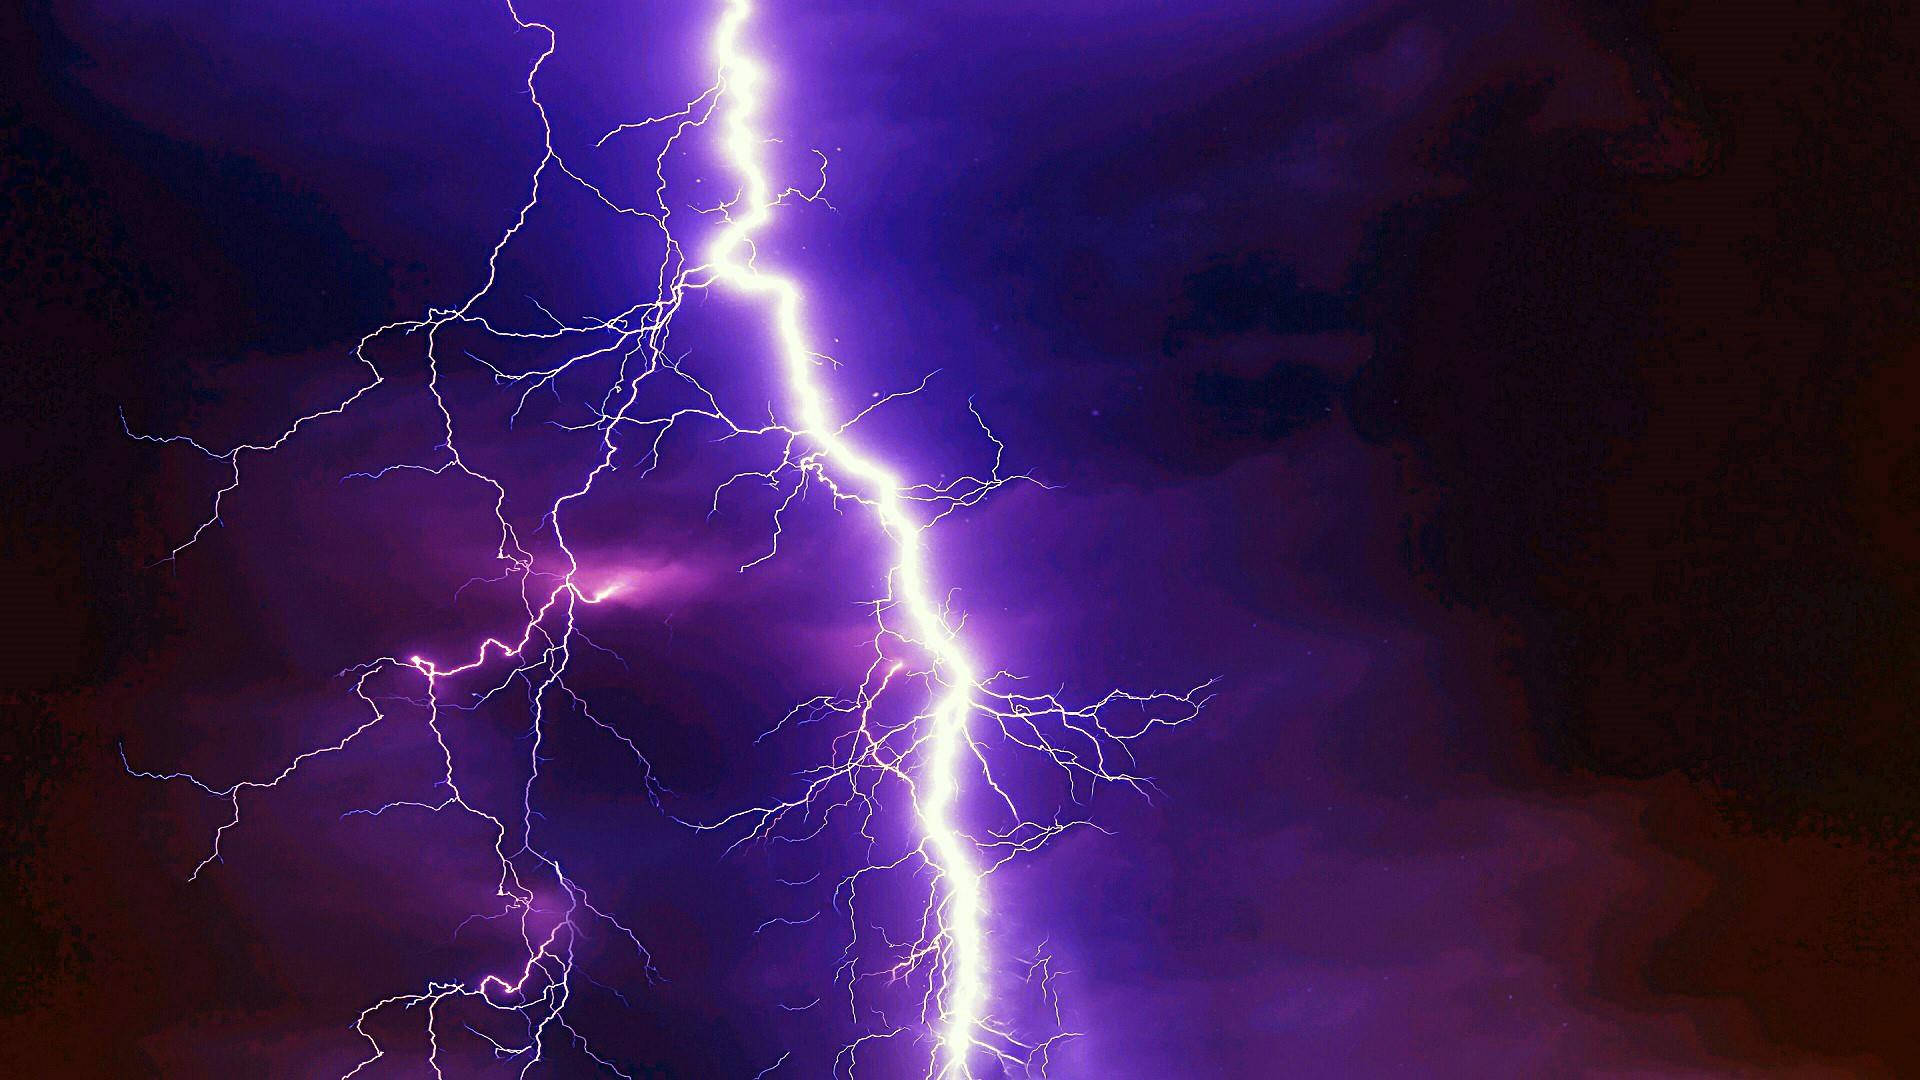 Capture the Beauty of the Lightning in the Night Sky Wallpaper